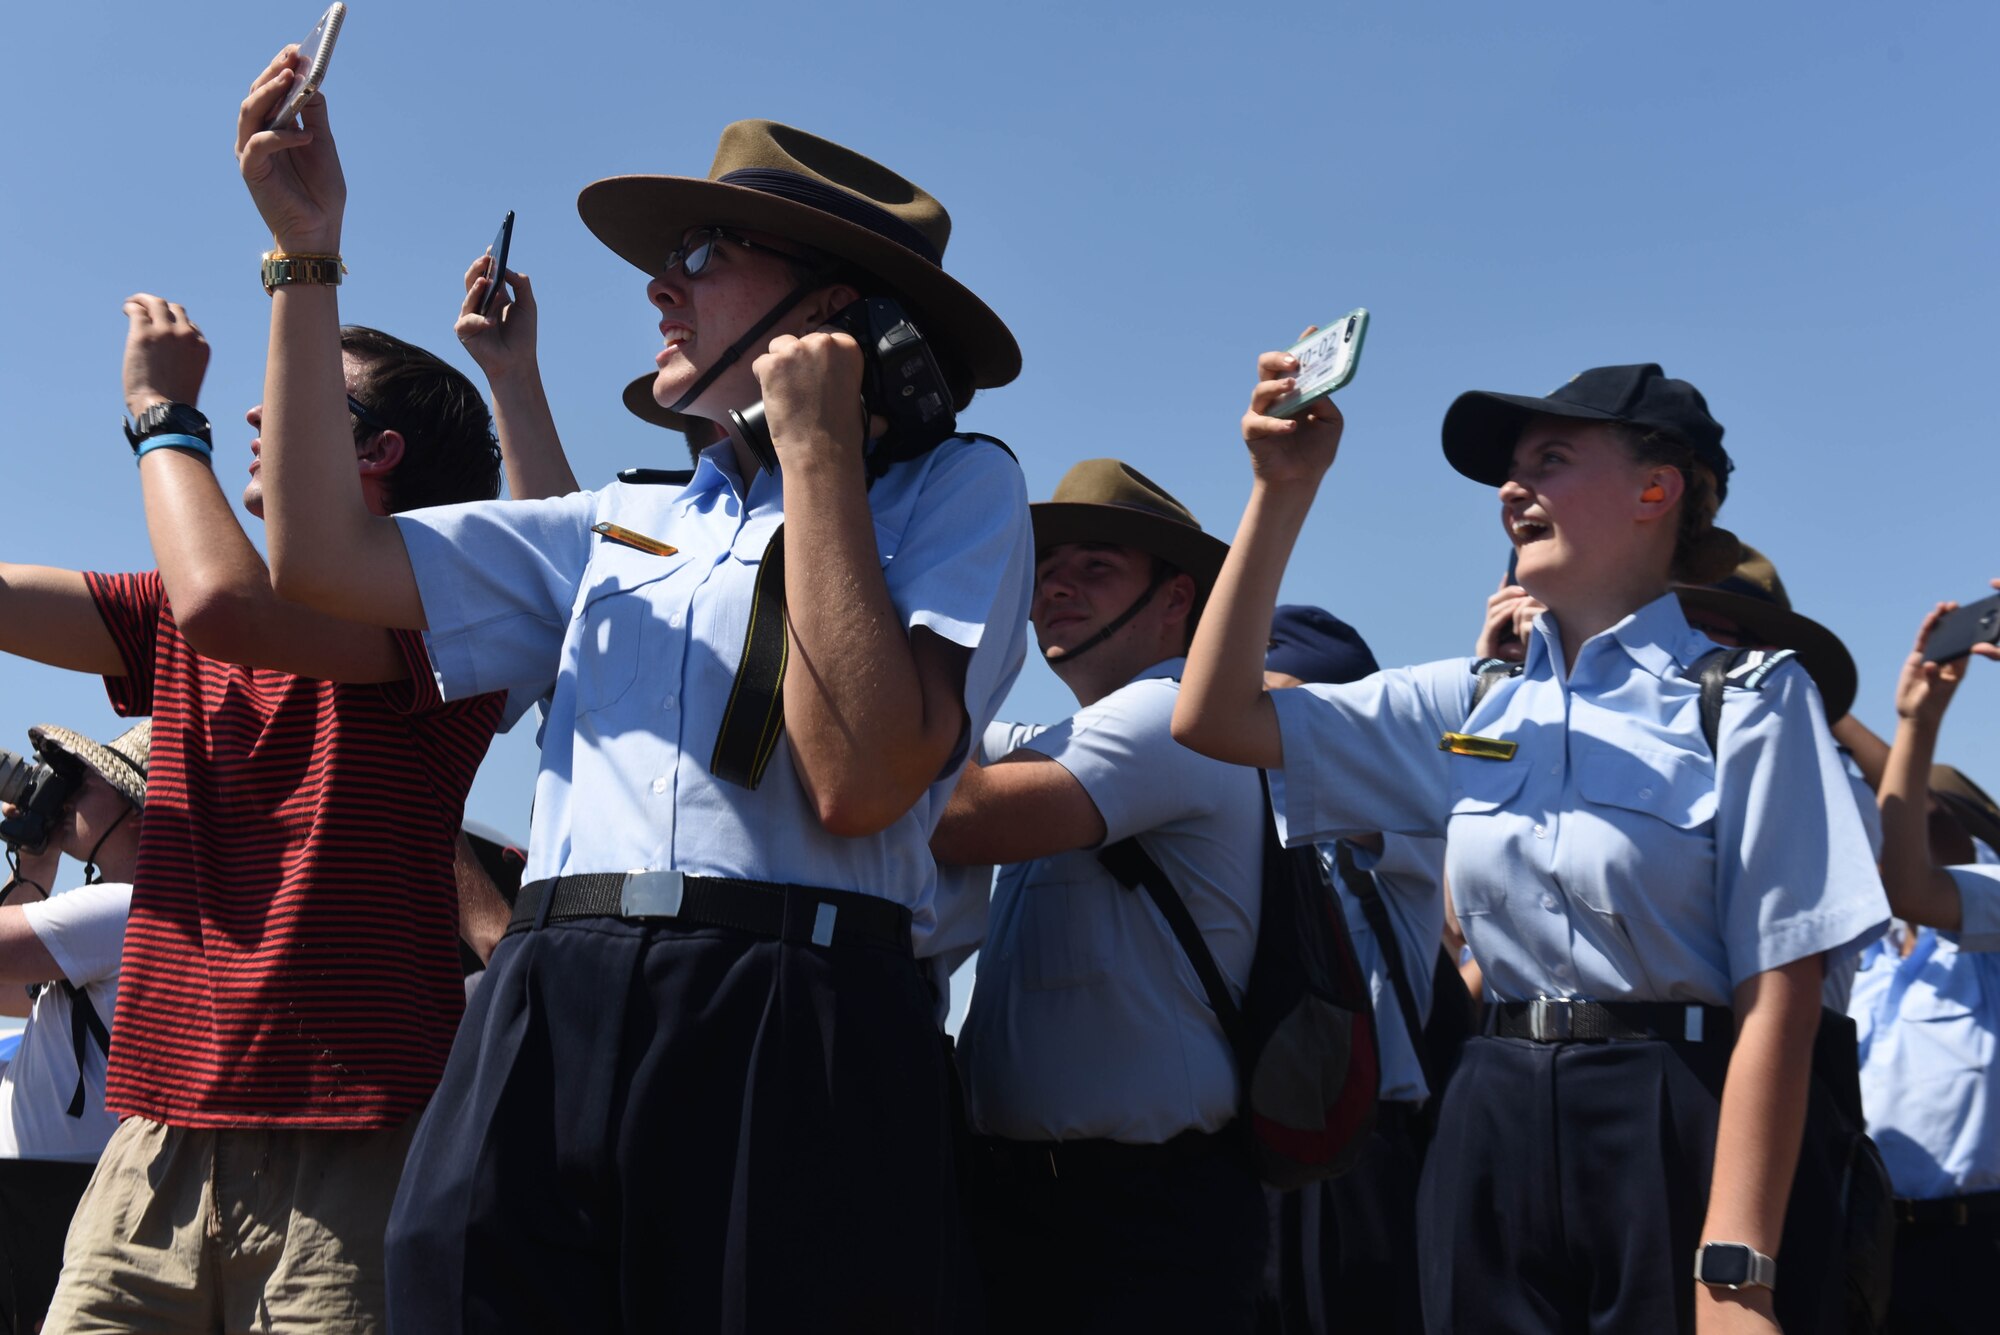 Airshow visitors raise their cameras to the sky to capture airpower in action during the Australian International Airshow, Mar. 2, 2019, in Geelong, Victoria, Australia. Over the week, the Avalon Airfield hosted more that 200,000 visitors and aviation fans. (U.S. Air Force photo by Capt. Annabel Monroe)